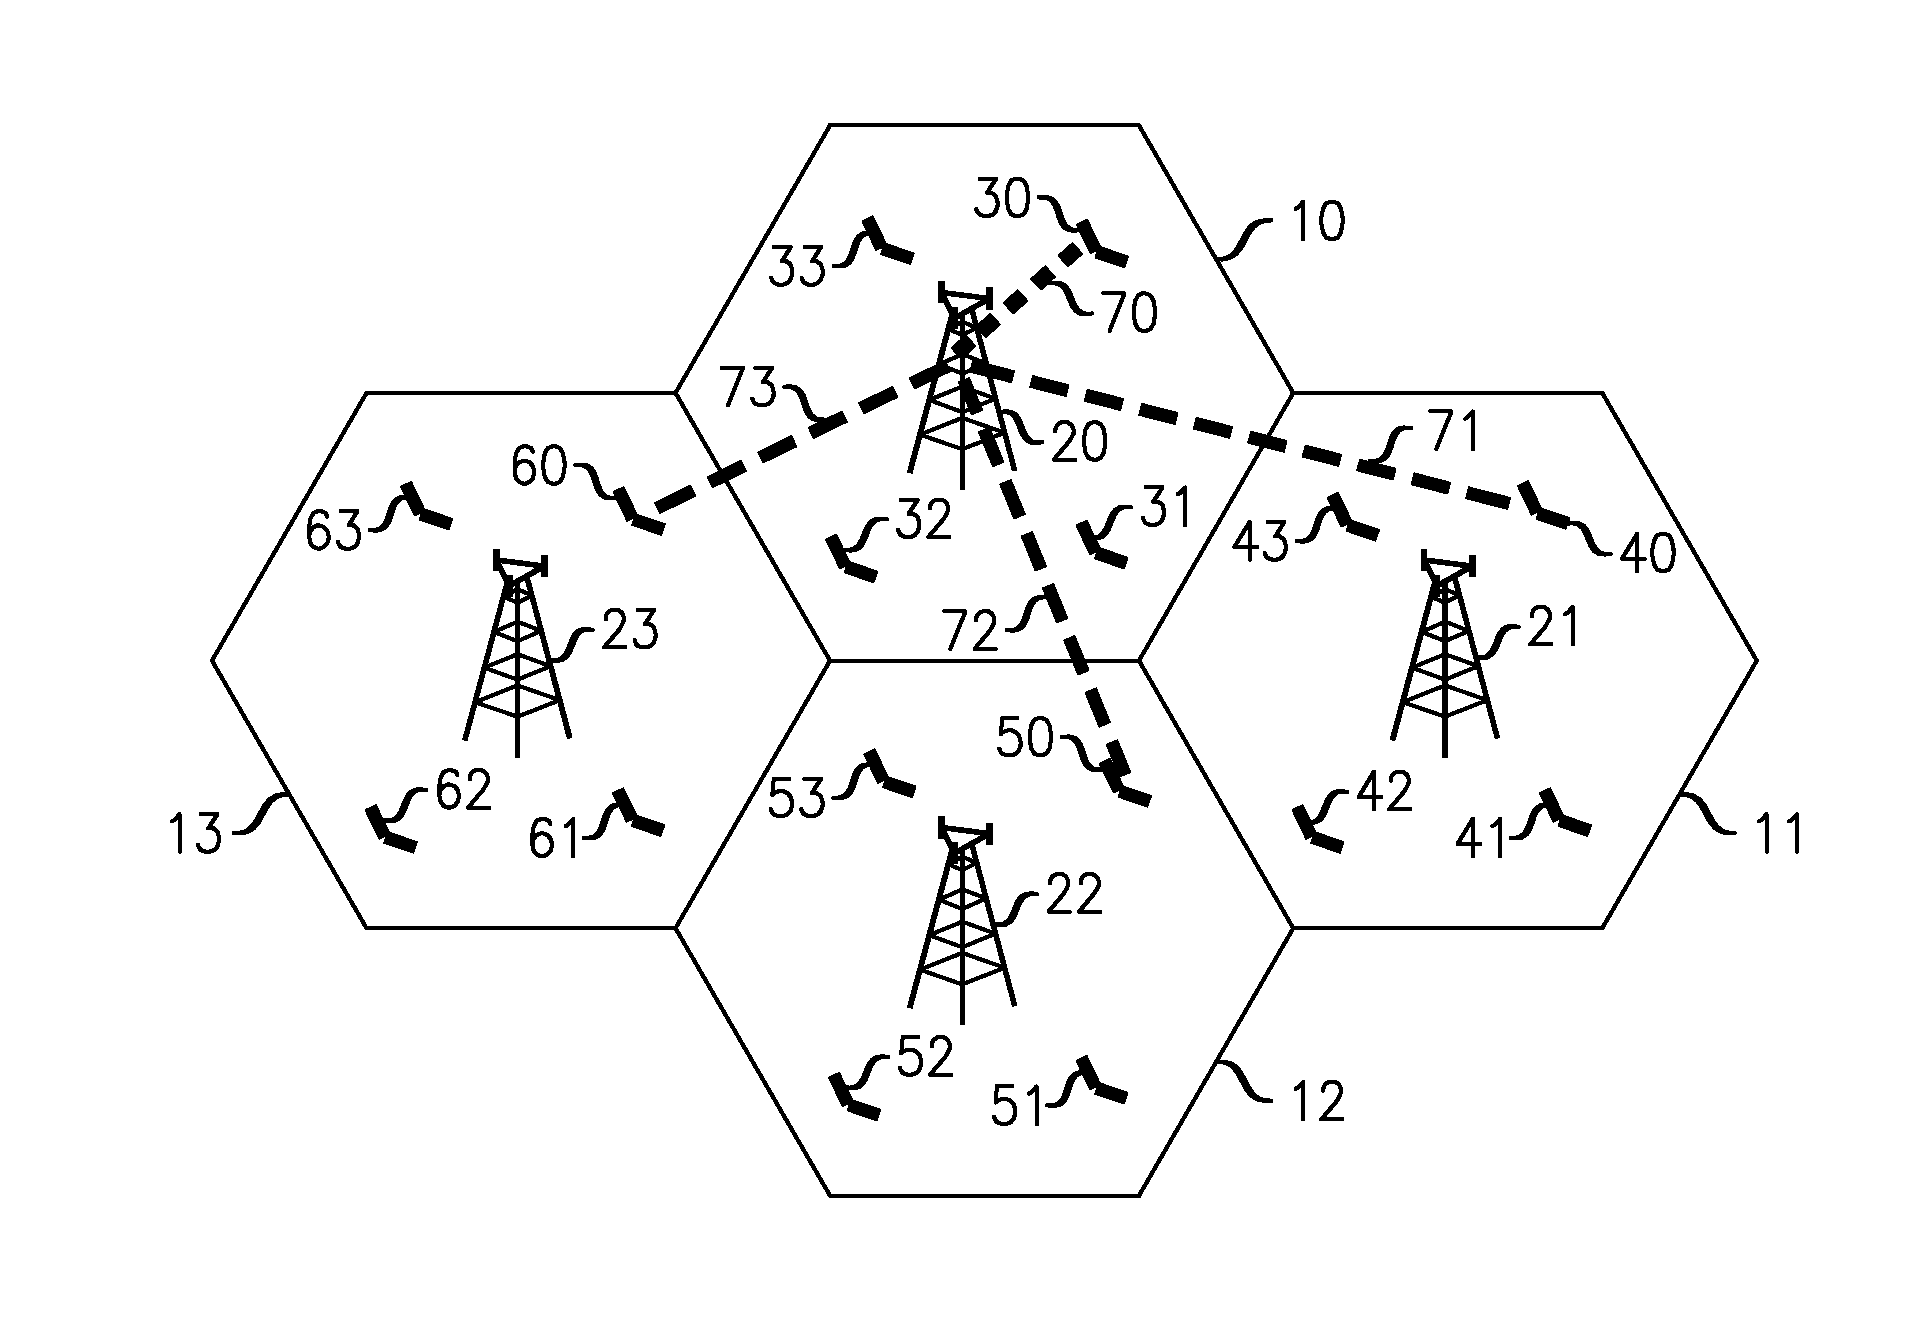 Wireless Communication with Suppression of Inter-Cell Interference in Large-Scale Antenna Systems